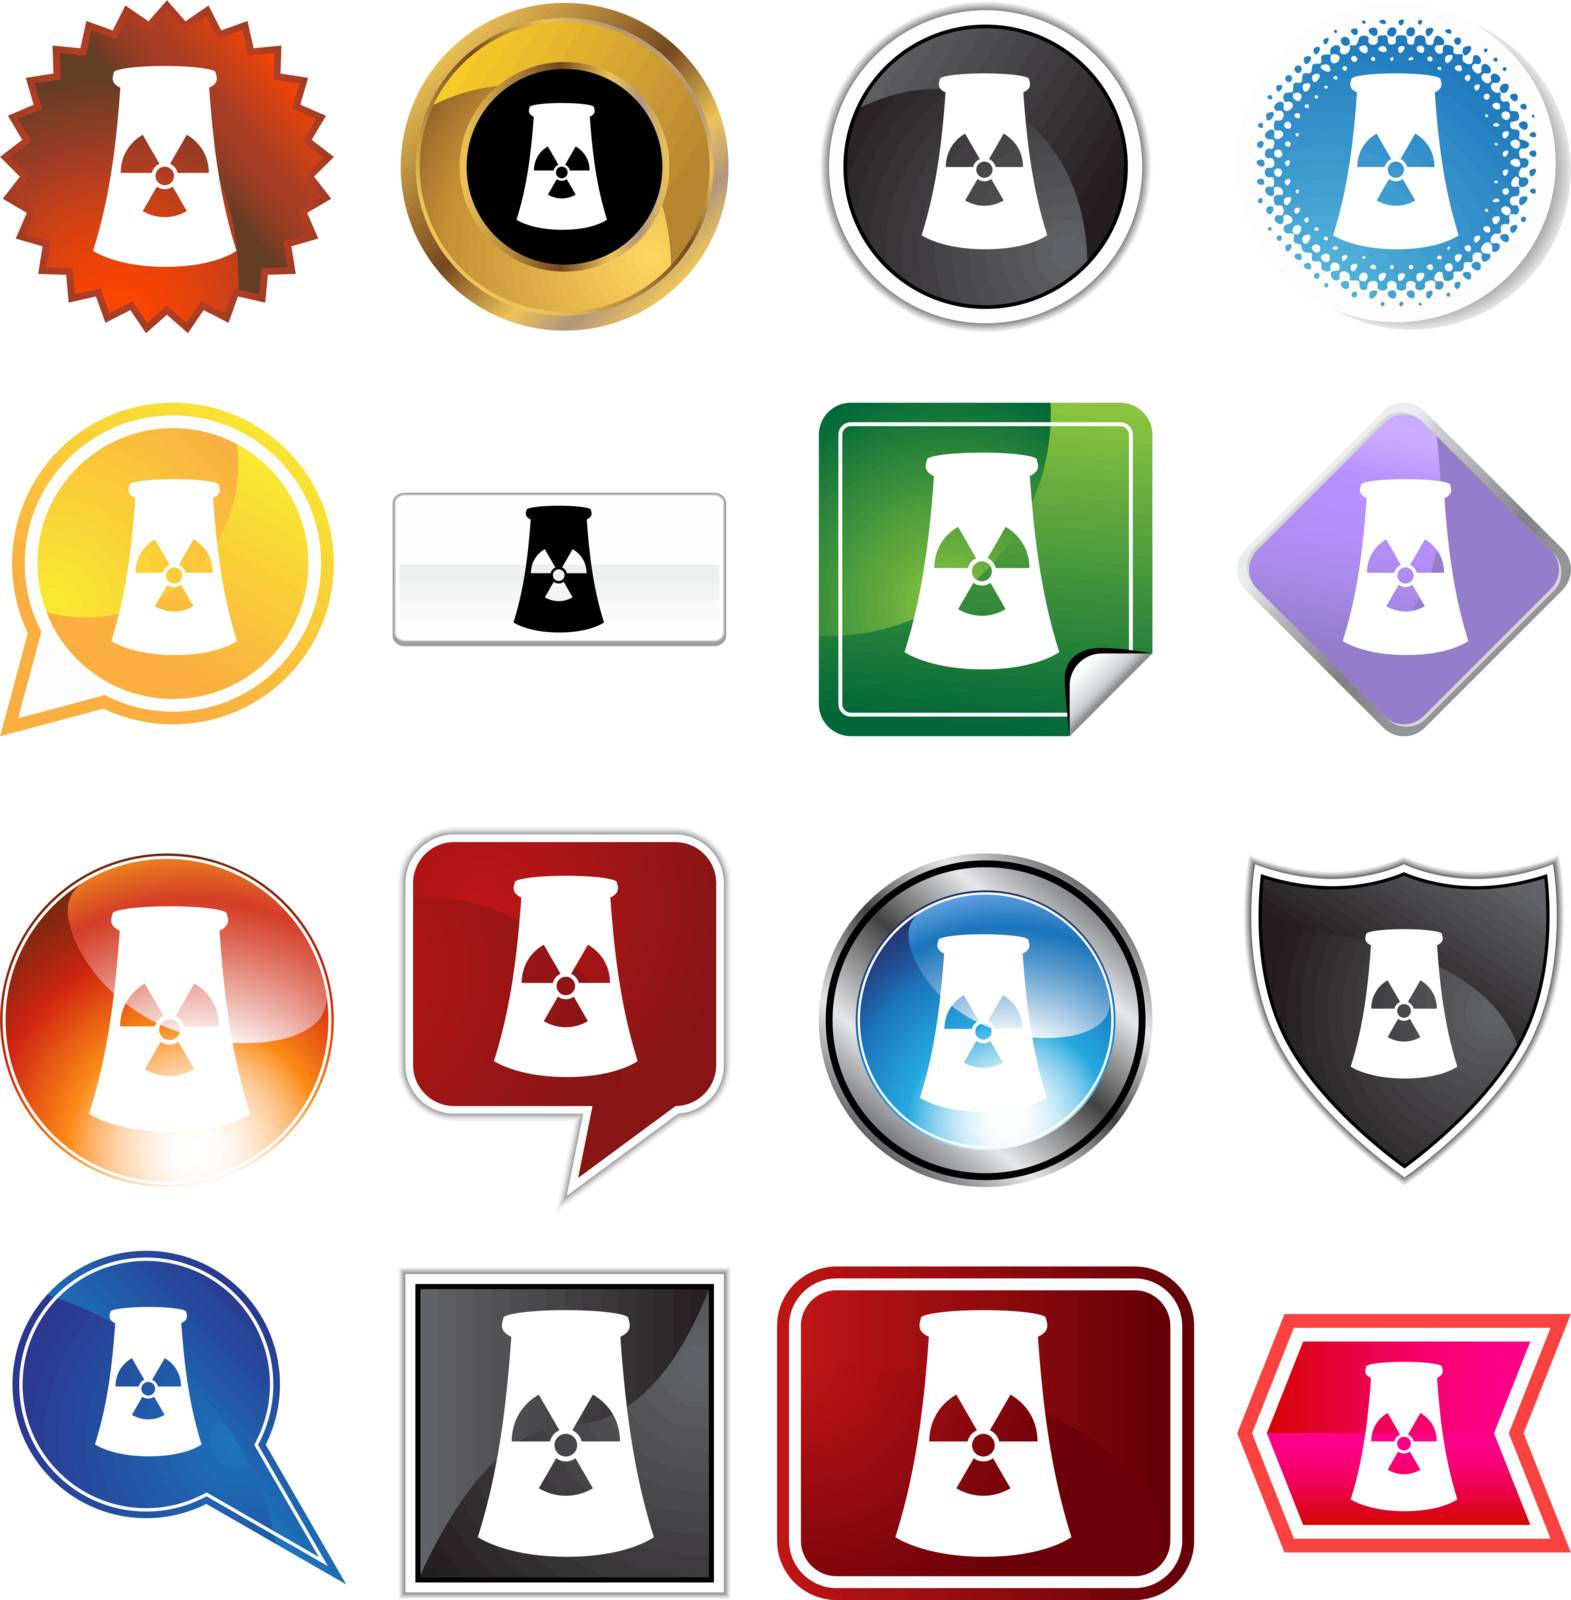 Nuclear powerplant icon set isolated on a white background.